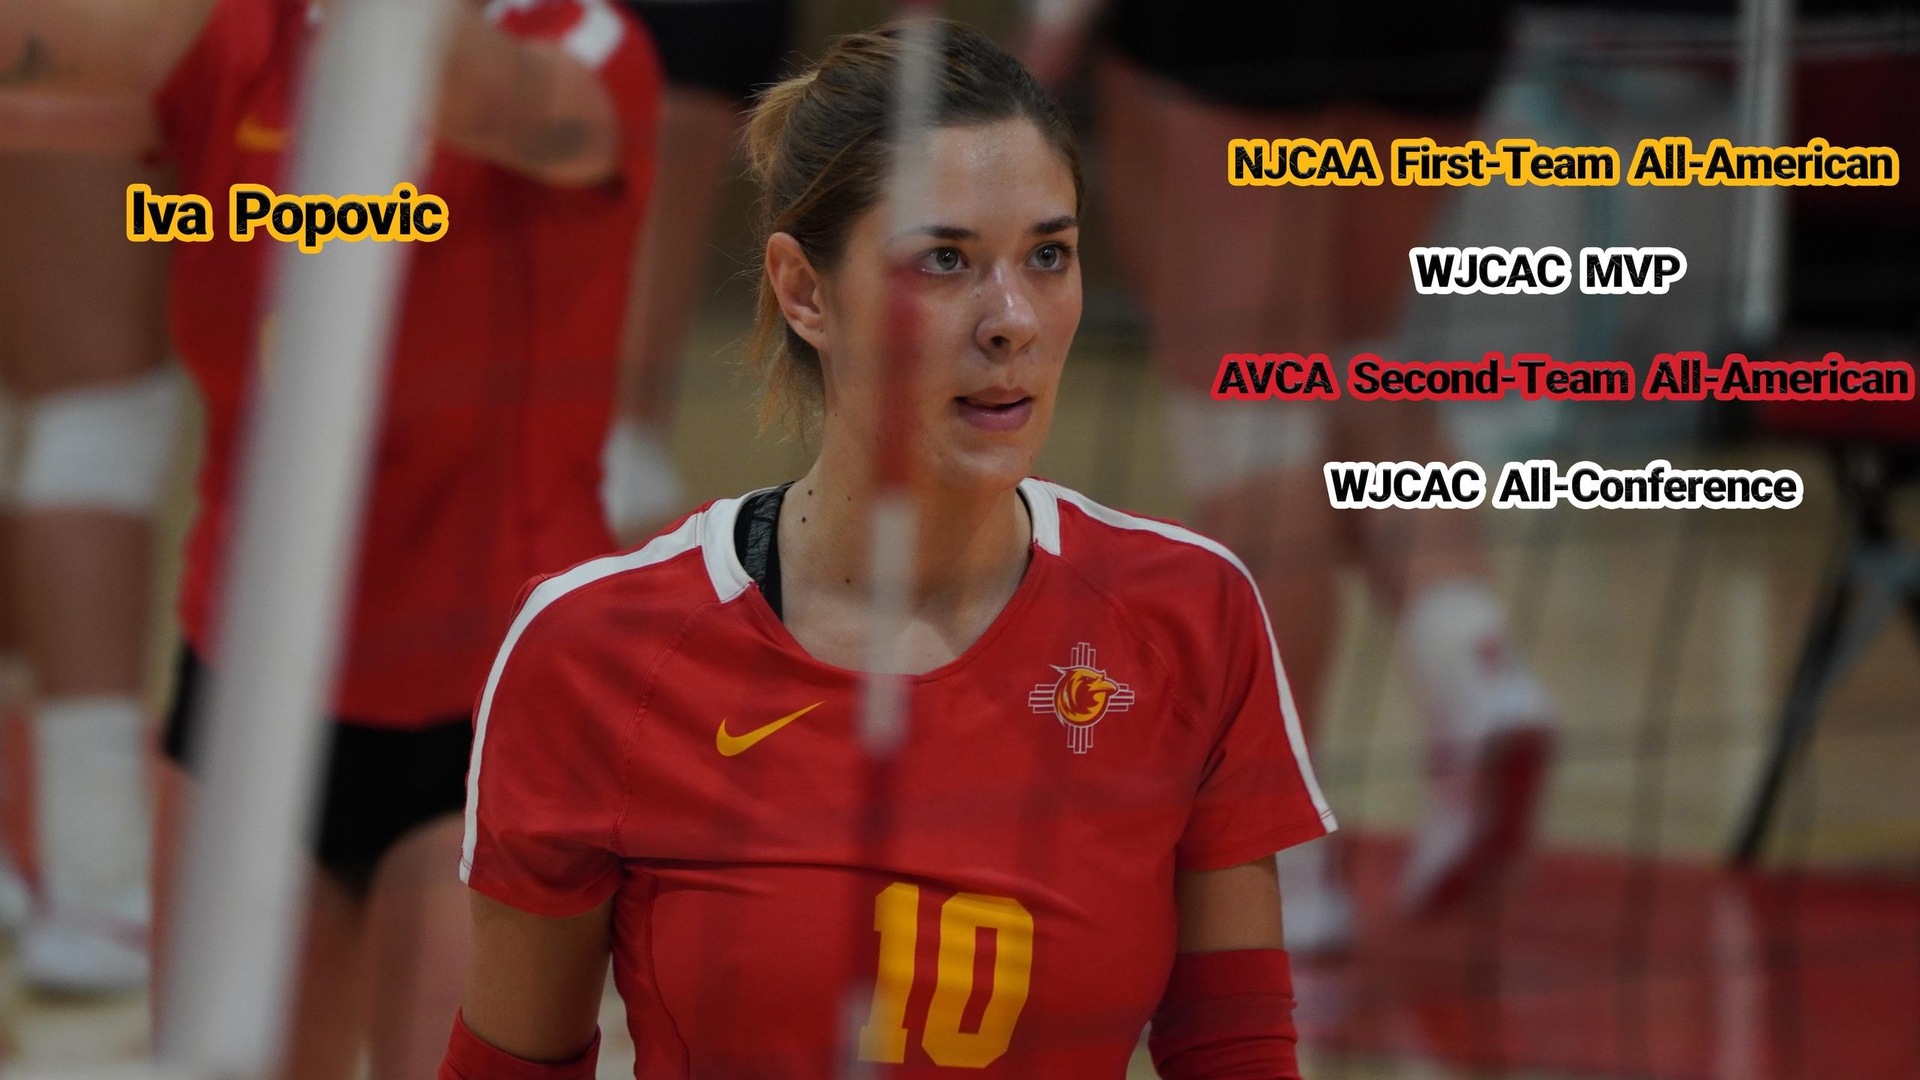 Iva Popovic Named NJCAA First-Team All-American